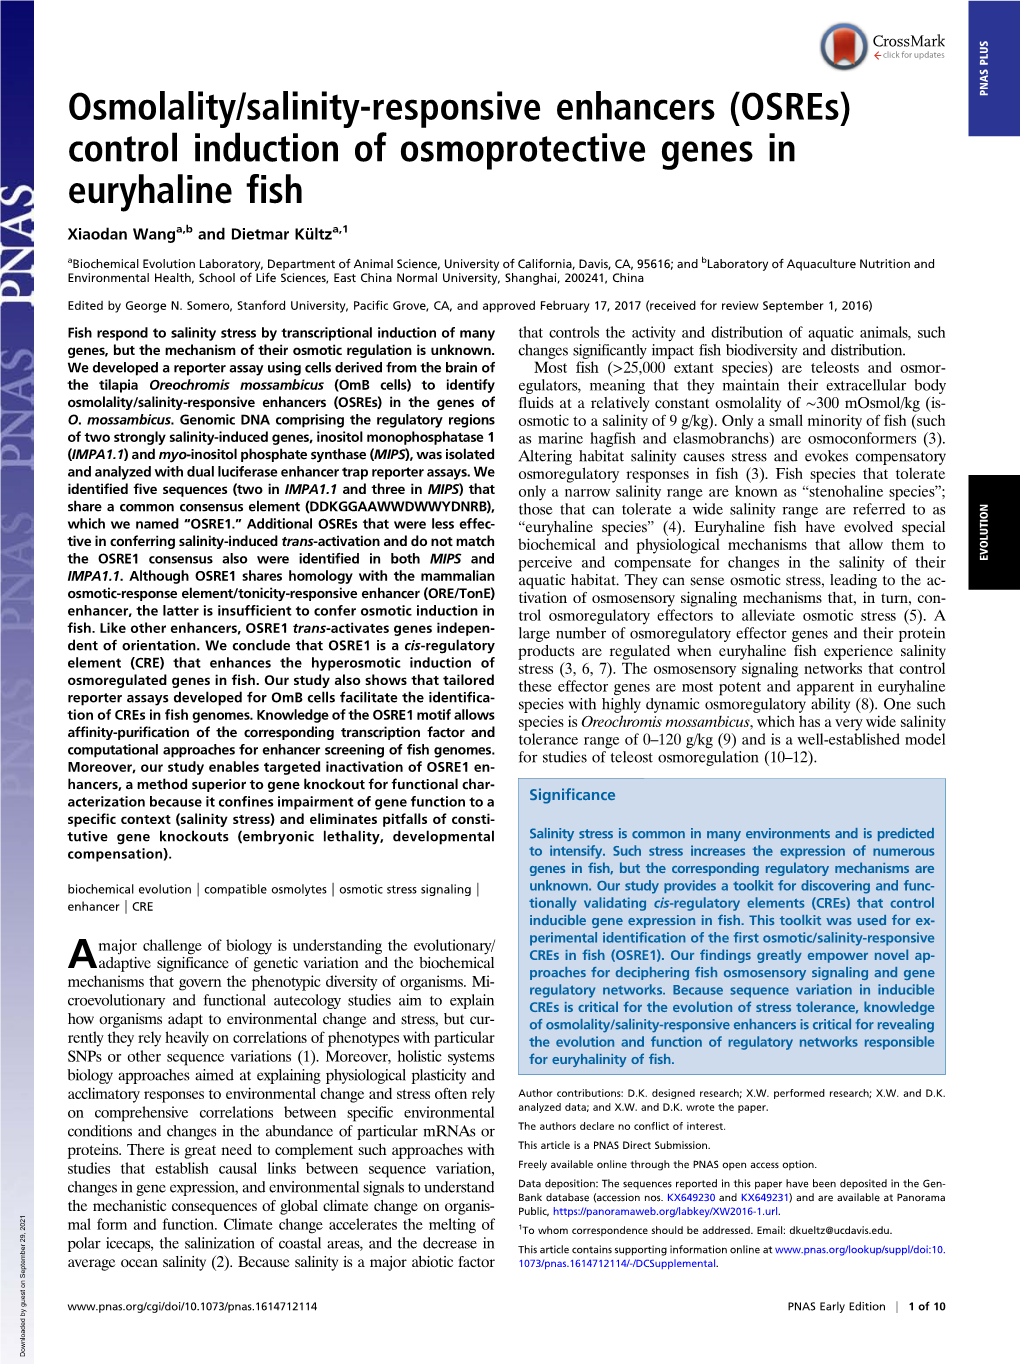 Control Induction of Osmoprotective Genes in Euryhaline Fish